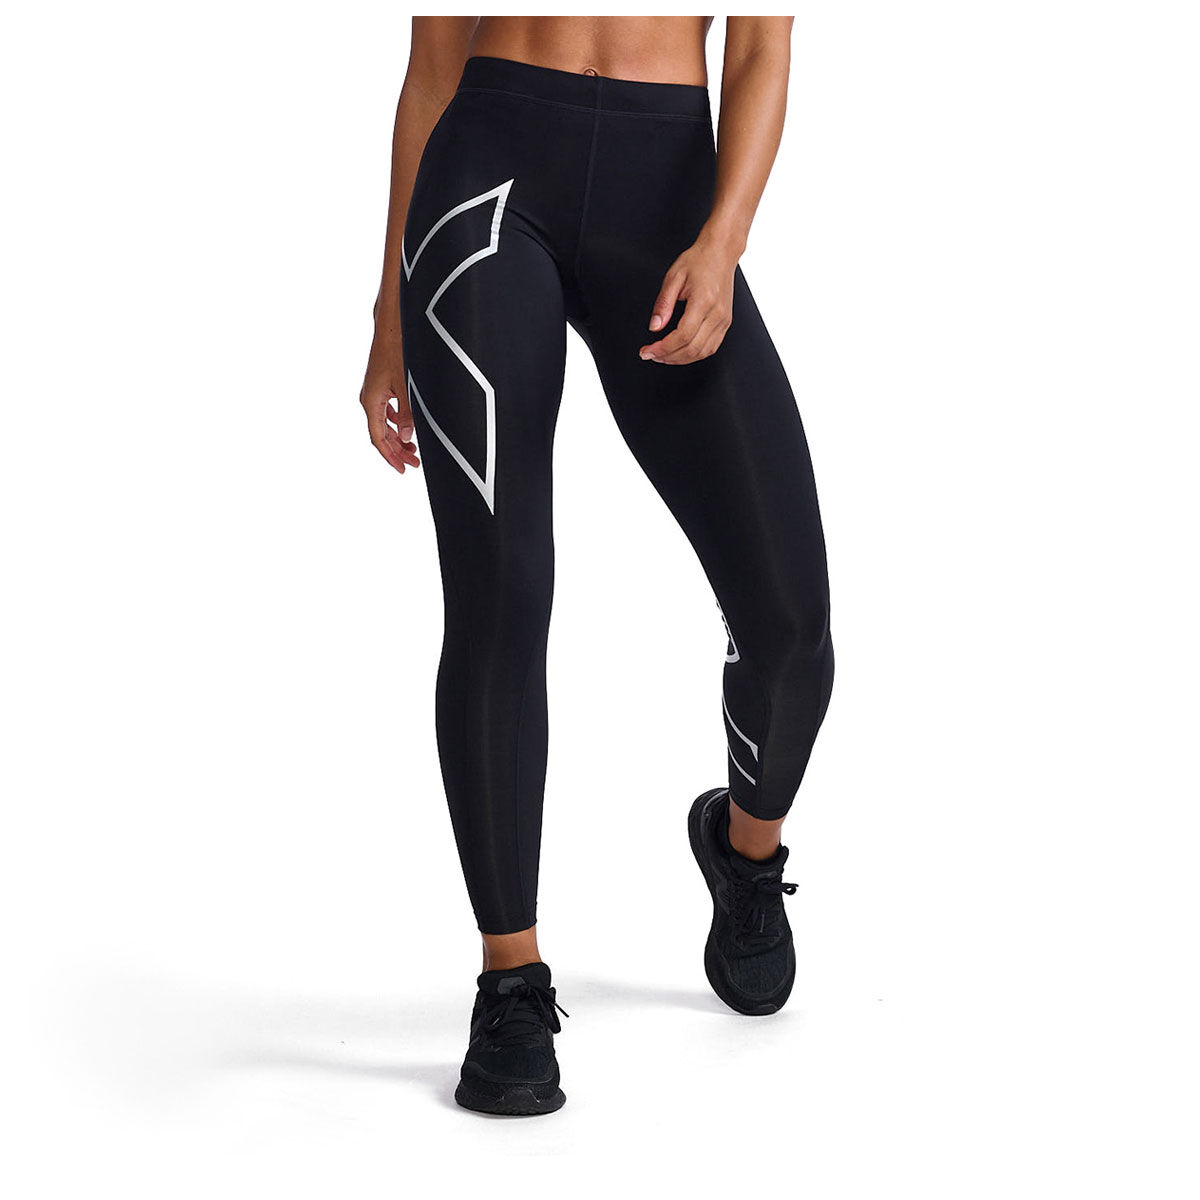 Buy Nike Women's Legend Dri-Fit Quake Tight Fit Training Compression Pants  Black Camo Small Online at Low Prices in India - Amazon.in